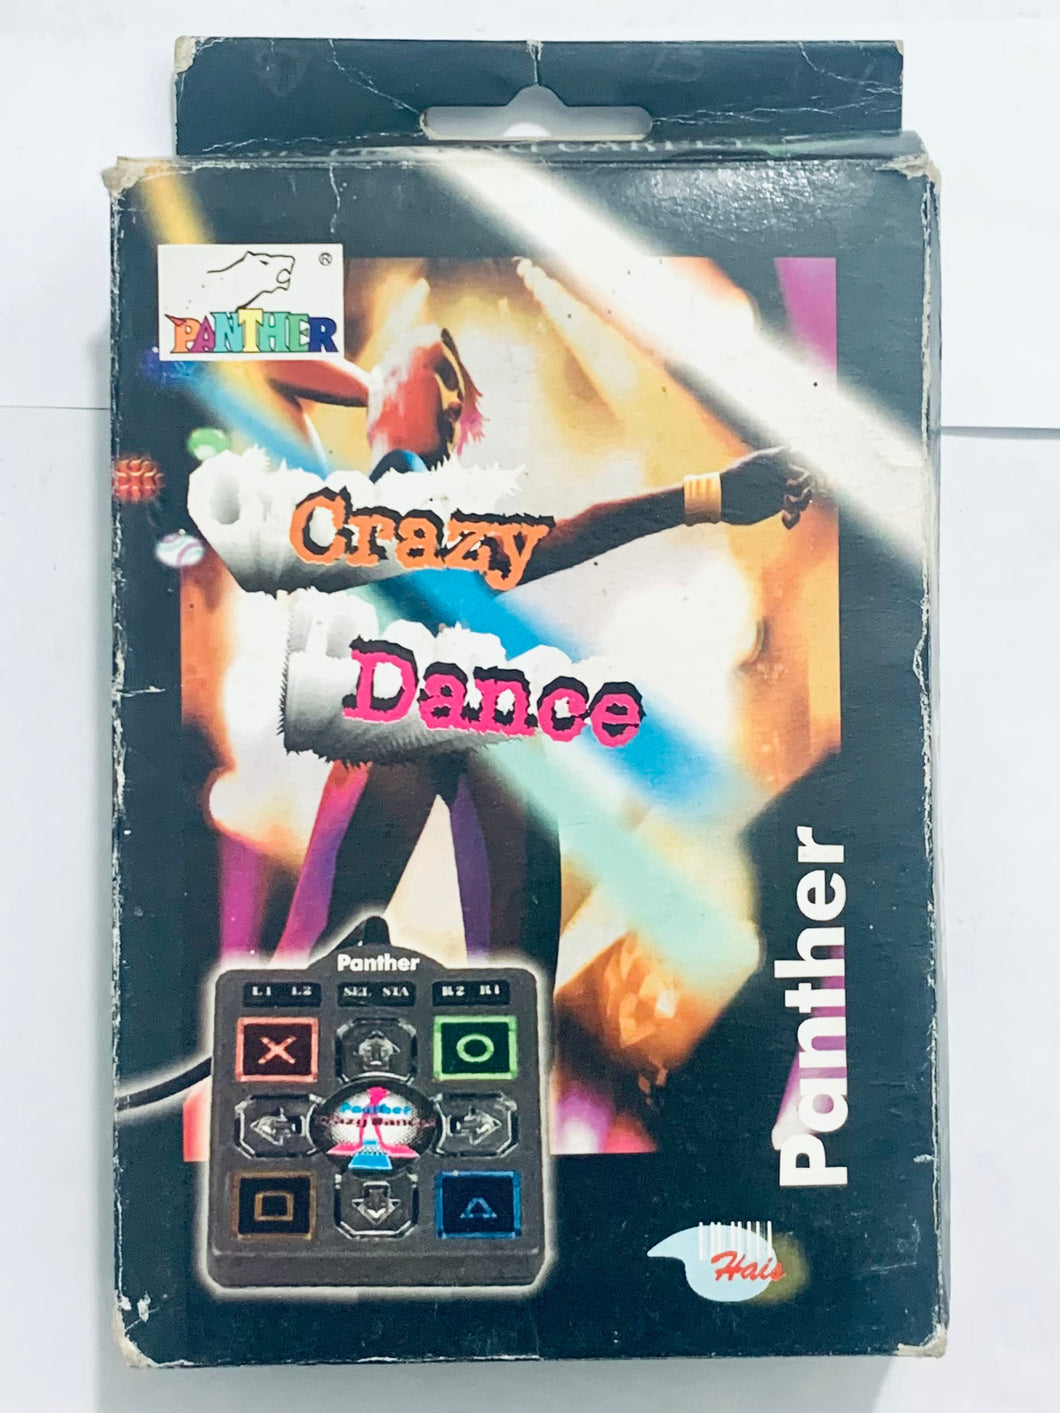 Panther Crazy Dance Mini Palm-Type Game-Playing Carpet - PlayStation - PS1/PSOne - CIB (PT-906)